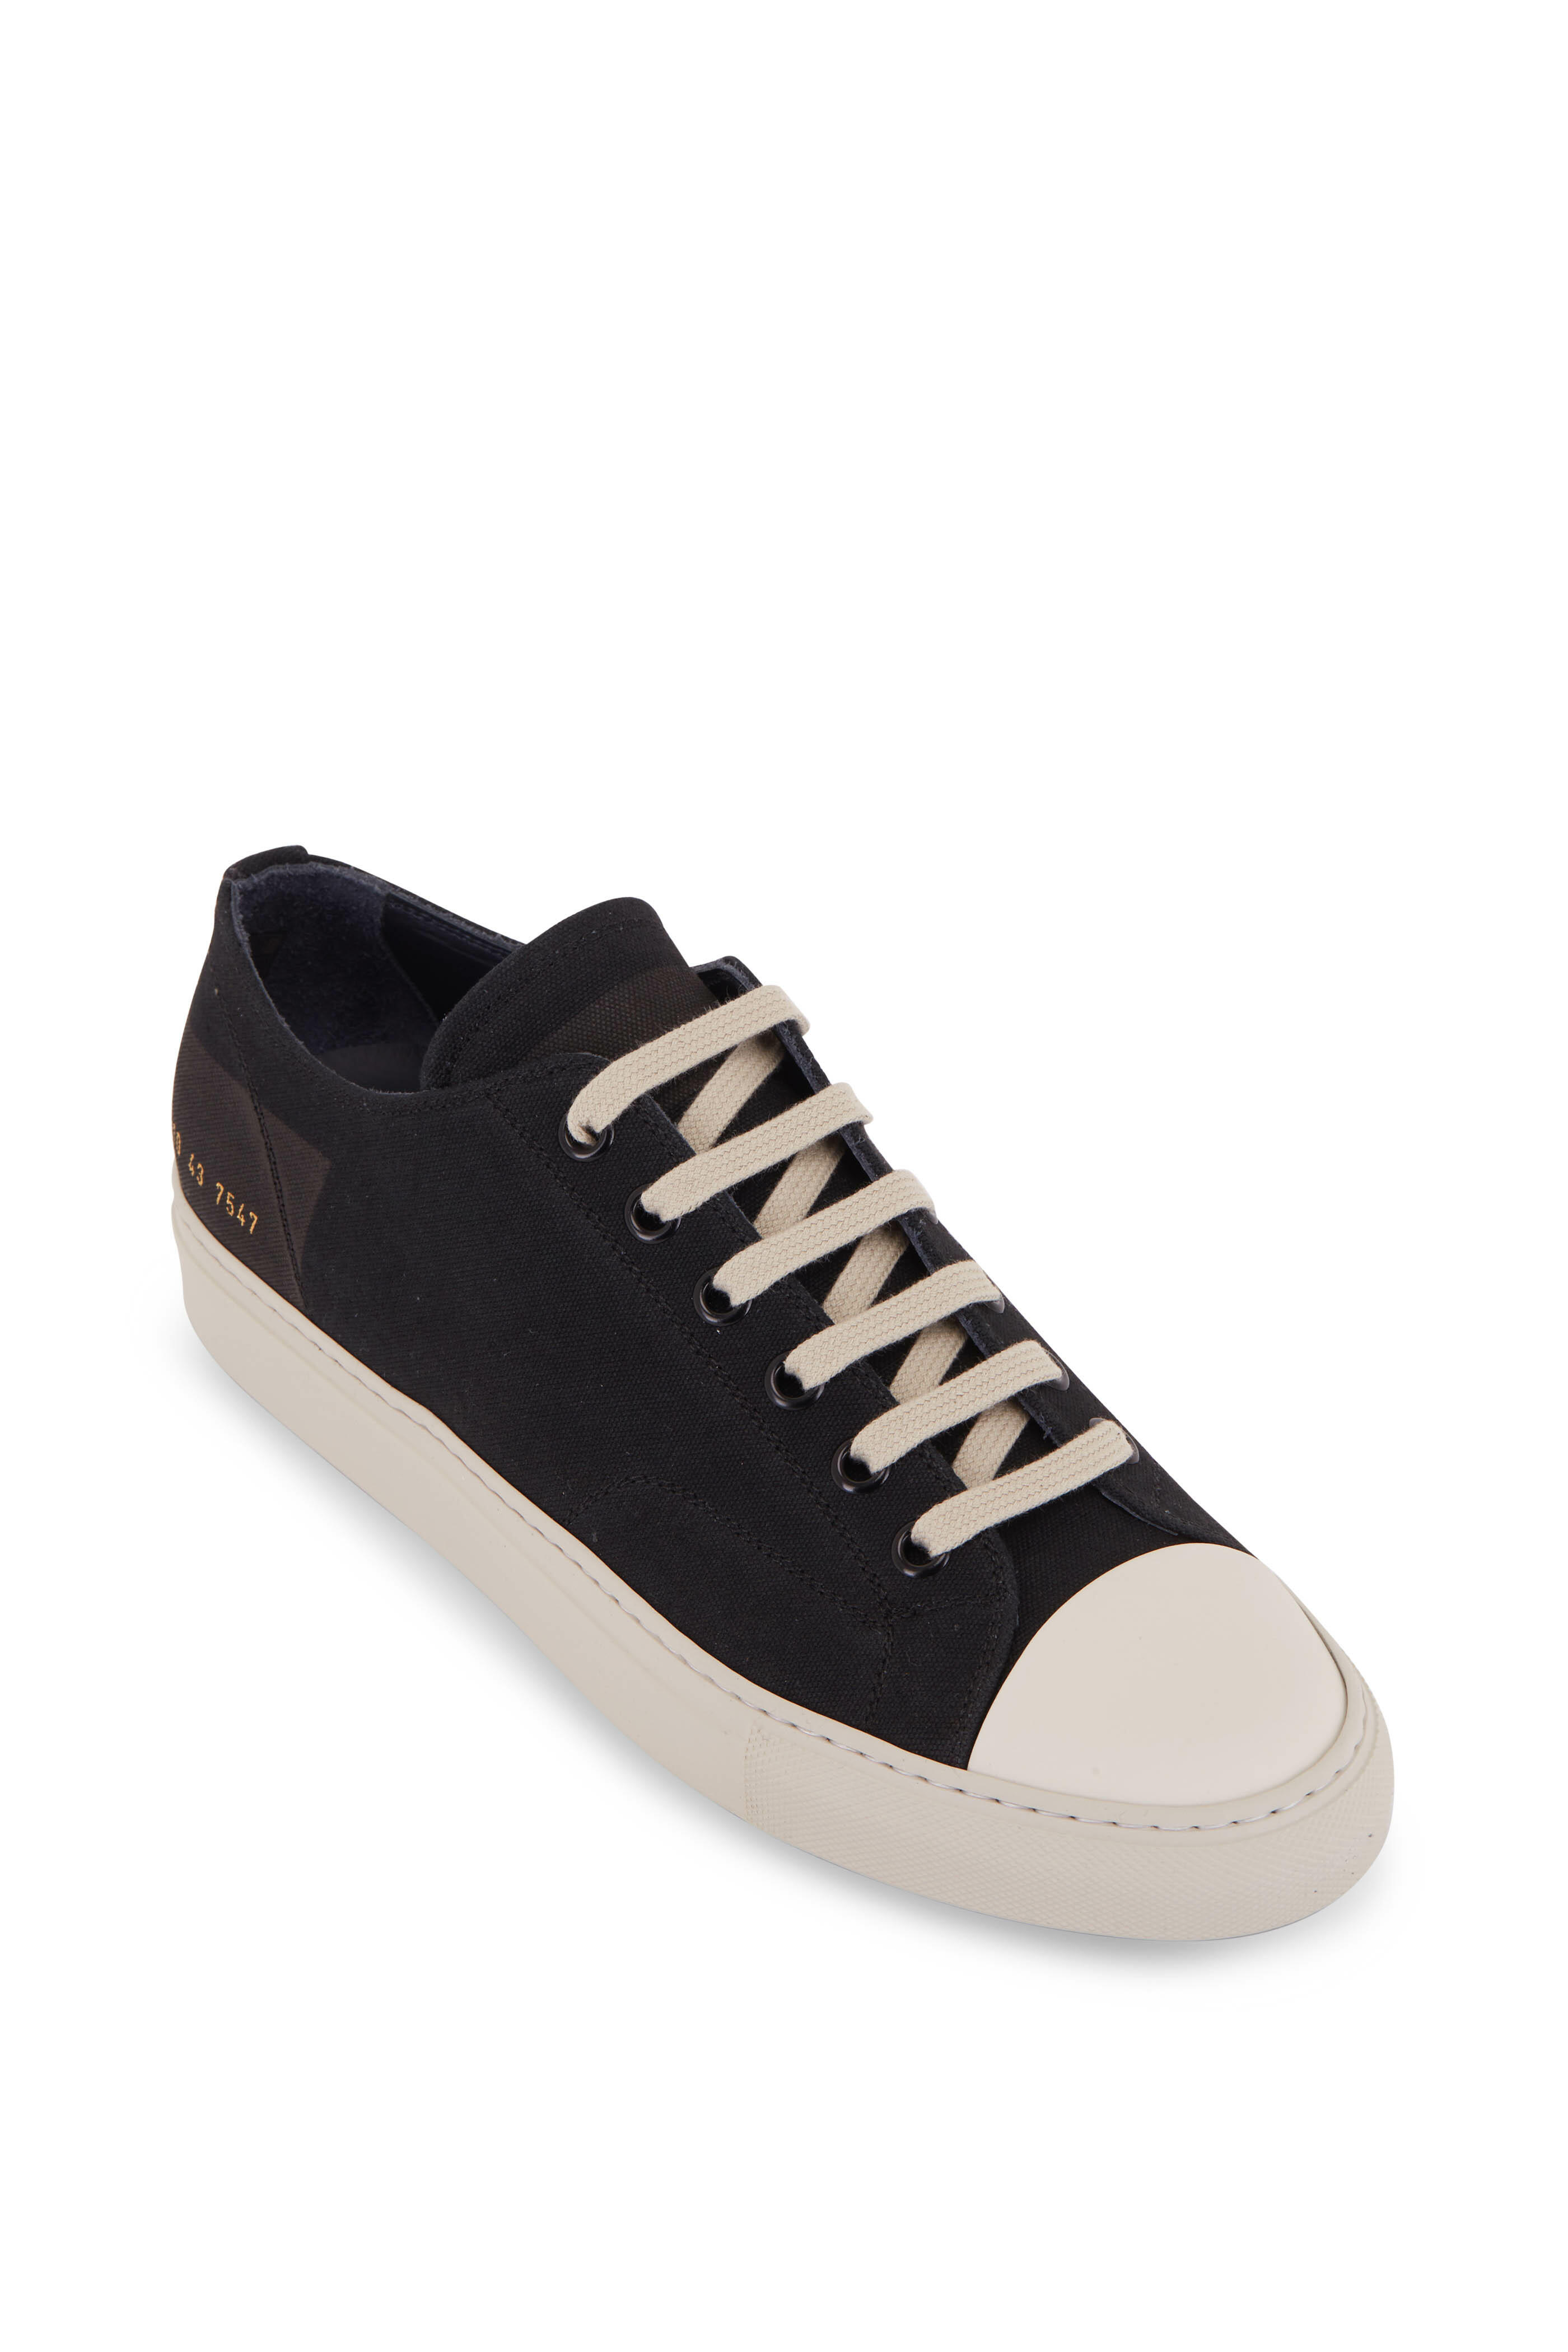 Løb prioritet Trin Common Projects - Tournament Black Canvas Low Top Sneaker